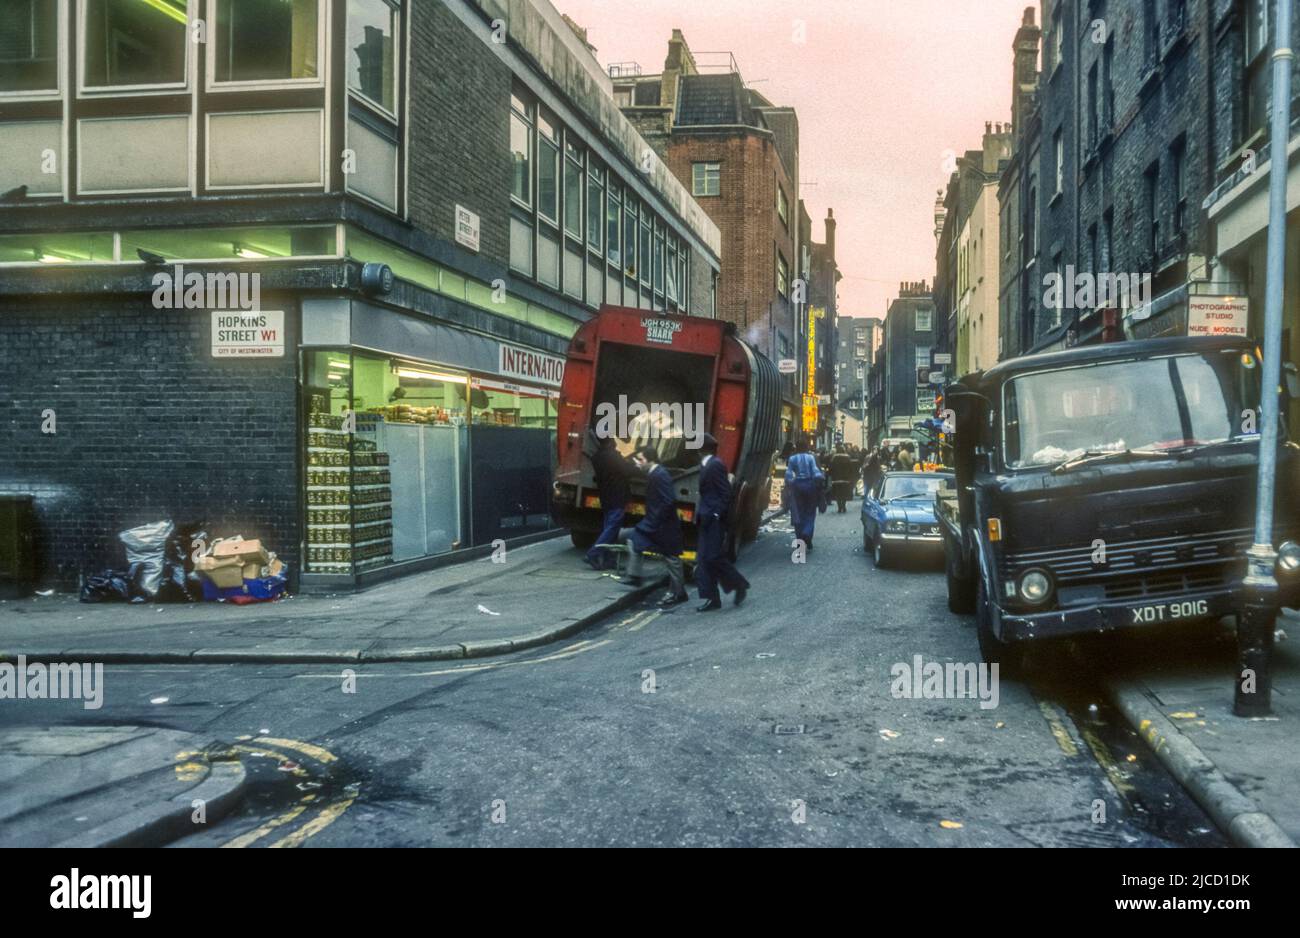 1976 archive mage of the corner of Peter Street & Hopkins Street in Soho, London. Stock Photo